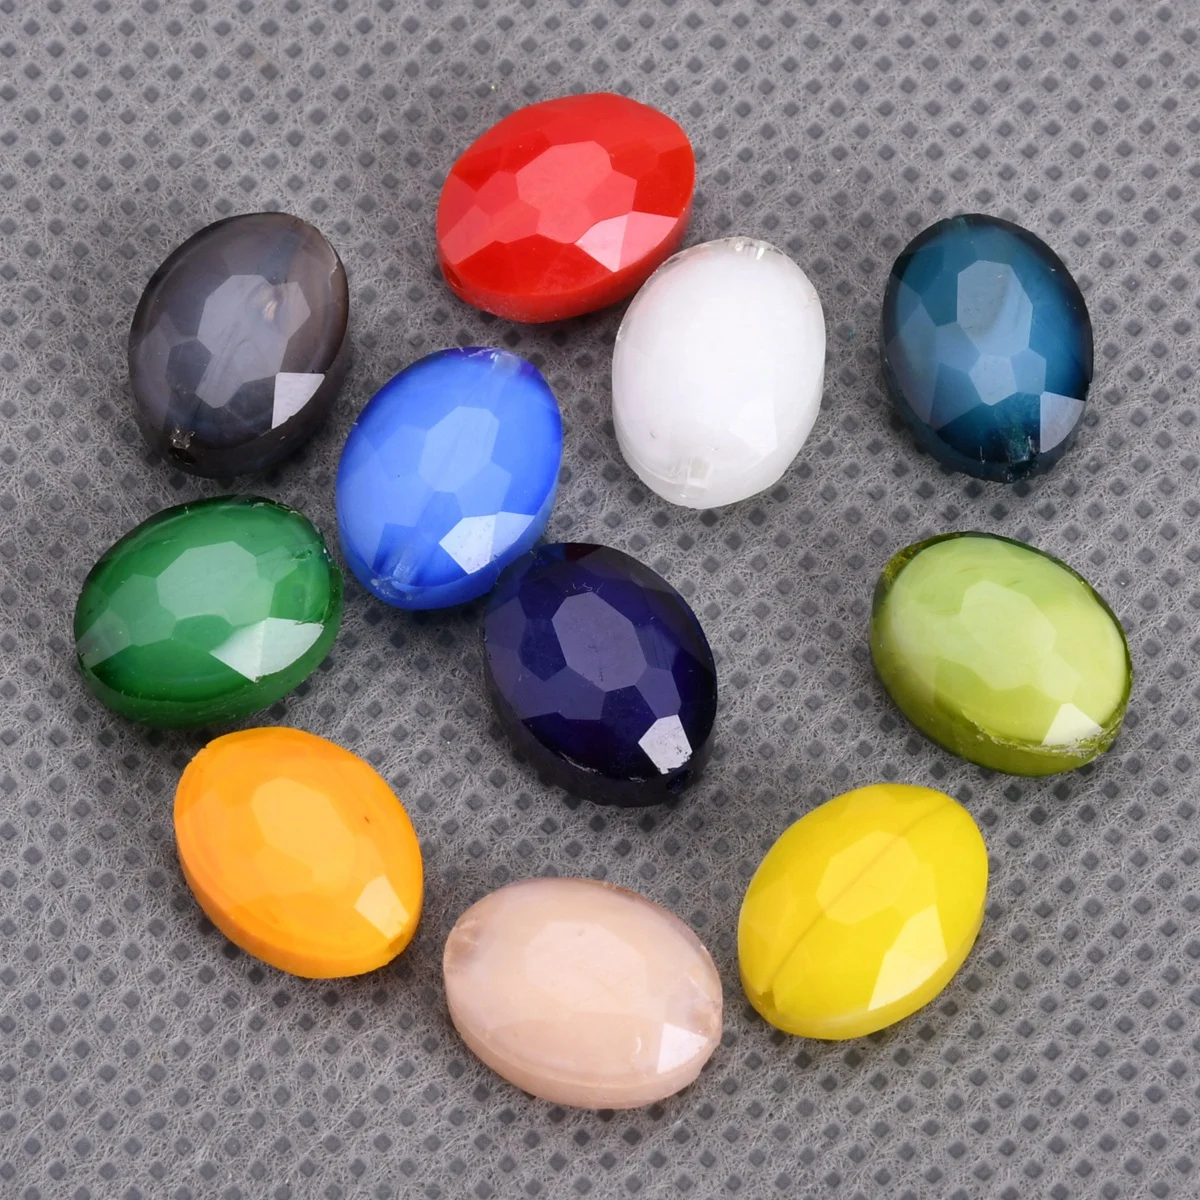 10pcs Oval Shape 12x9mm Opaque Faceted Glass Loose Beads For Jewelry Making DIY Crafts Findings 5pcs transparent 27mm austrian element peach heart pendant sun catcher crystal chandelier decor faceted glass prism love beads